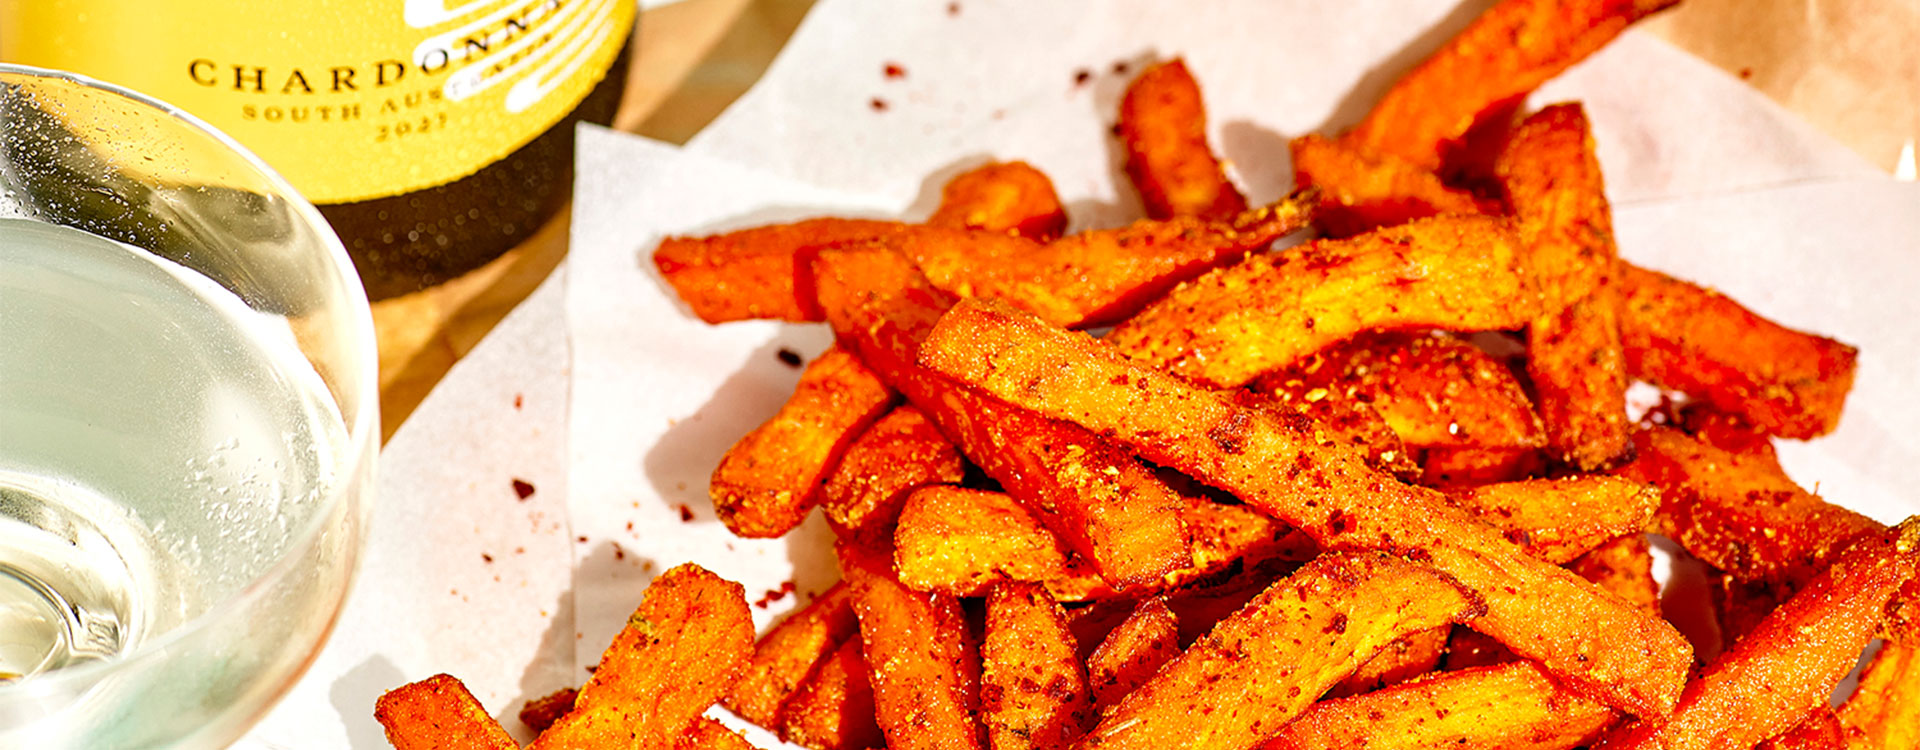 Baking your own super crisp sweet potato chips at home is not as challenging as you may think. Goes perfectly with a chilled Oxford Landing Chardonnay.